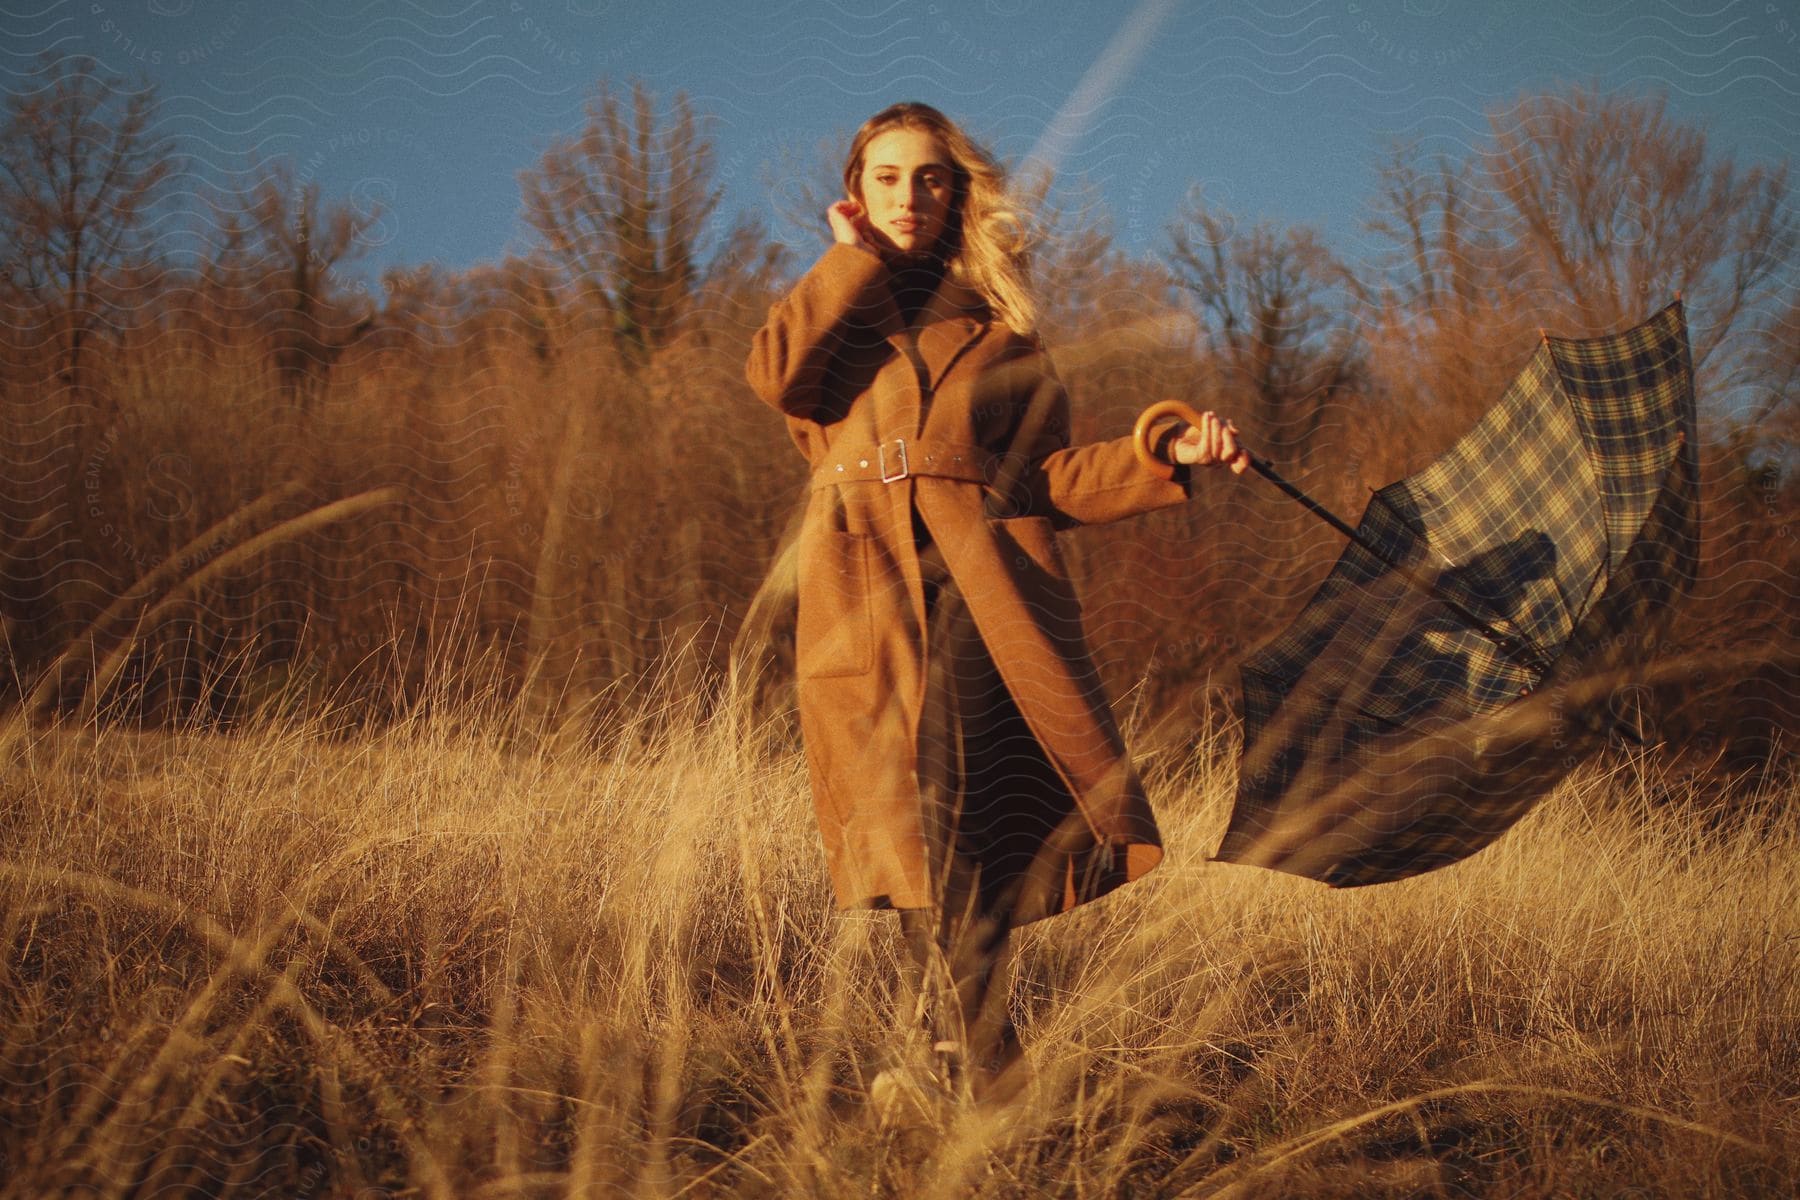 Blonde model in a field posing with a long brown coat and an open umbrella.